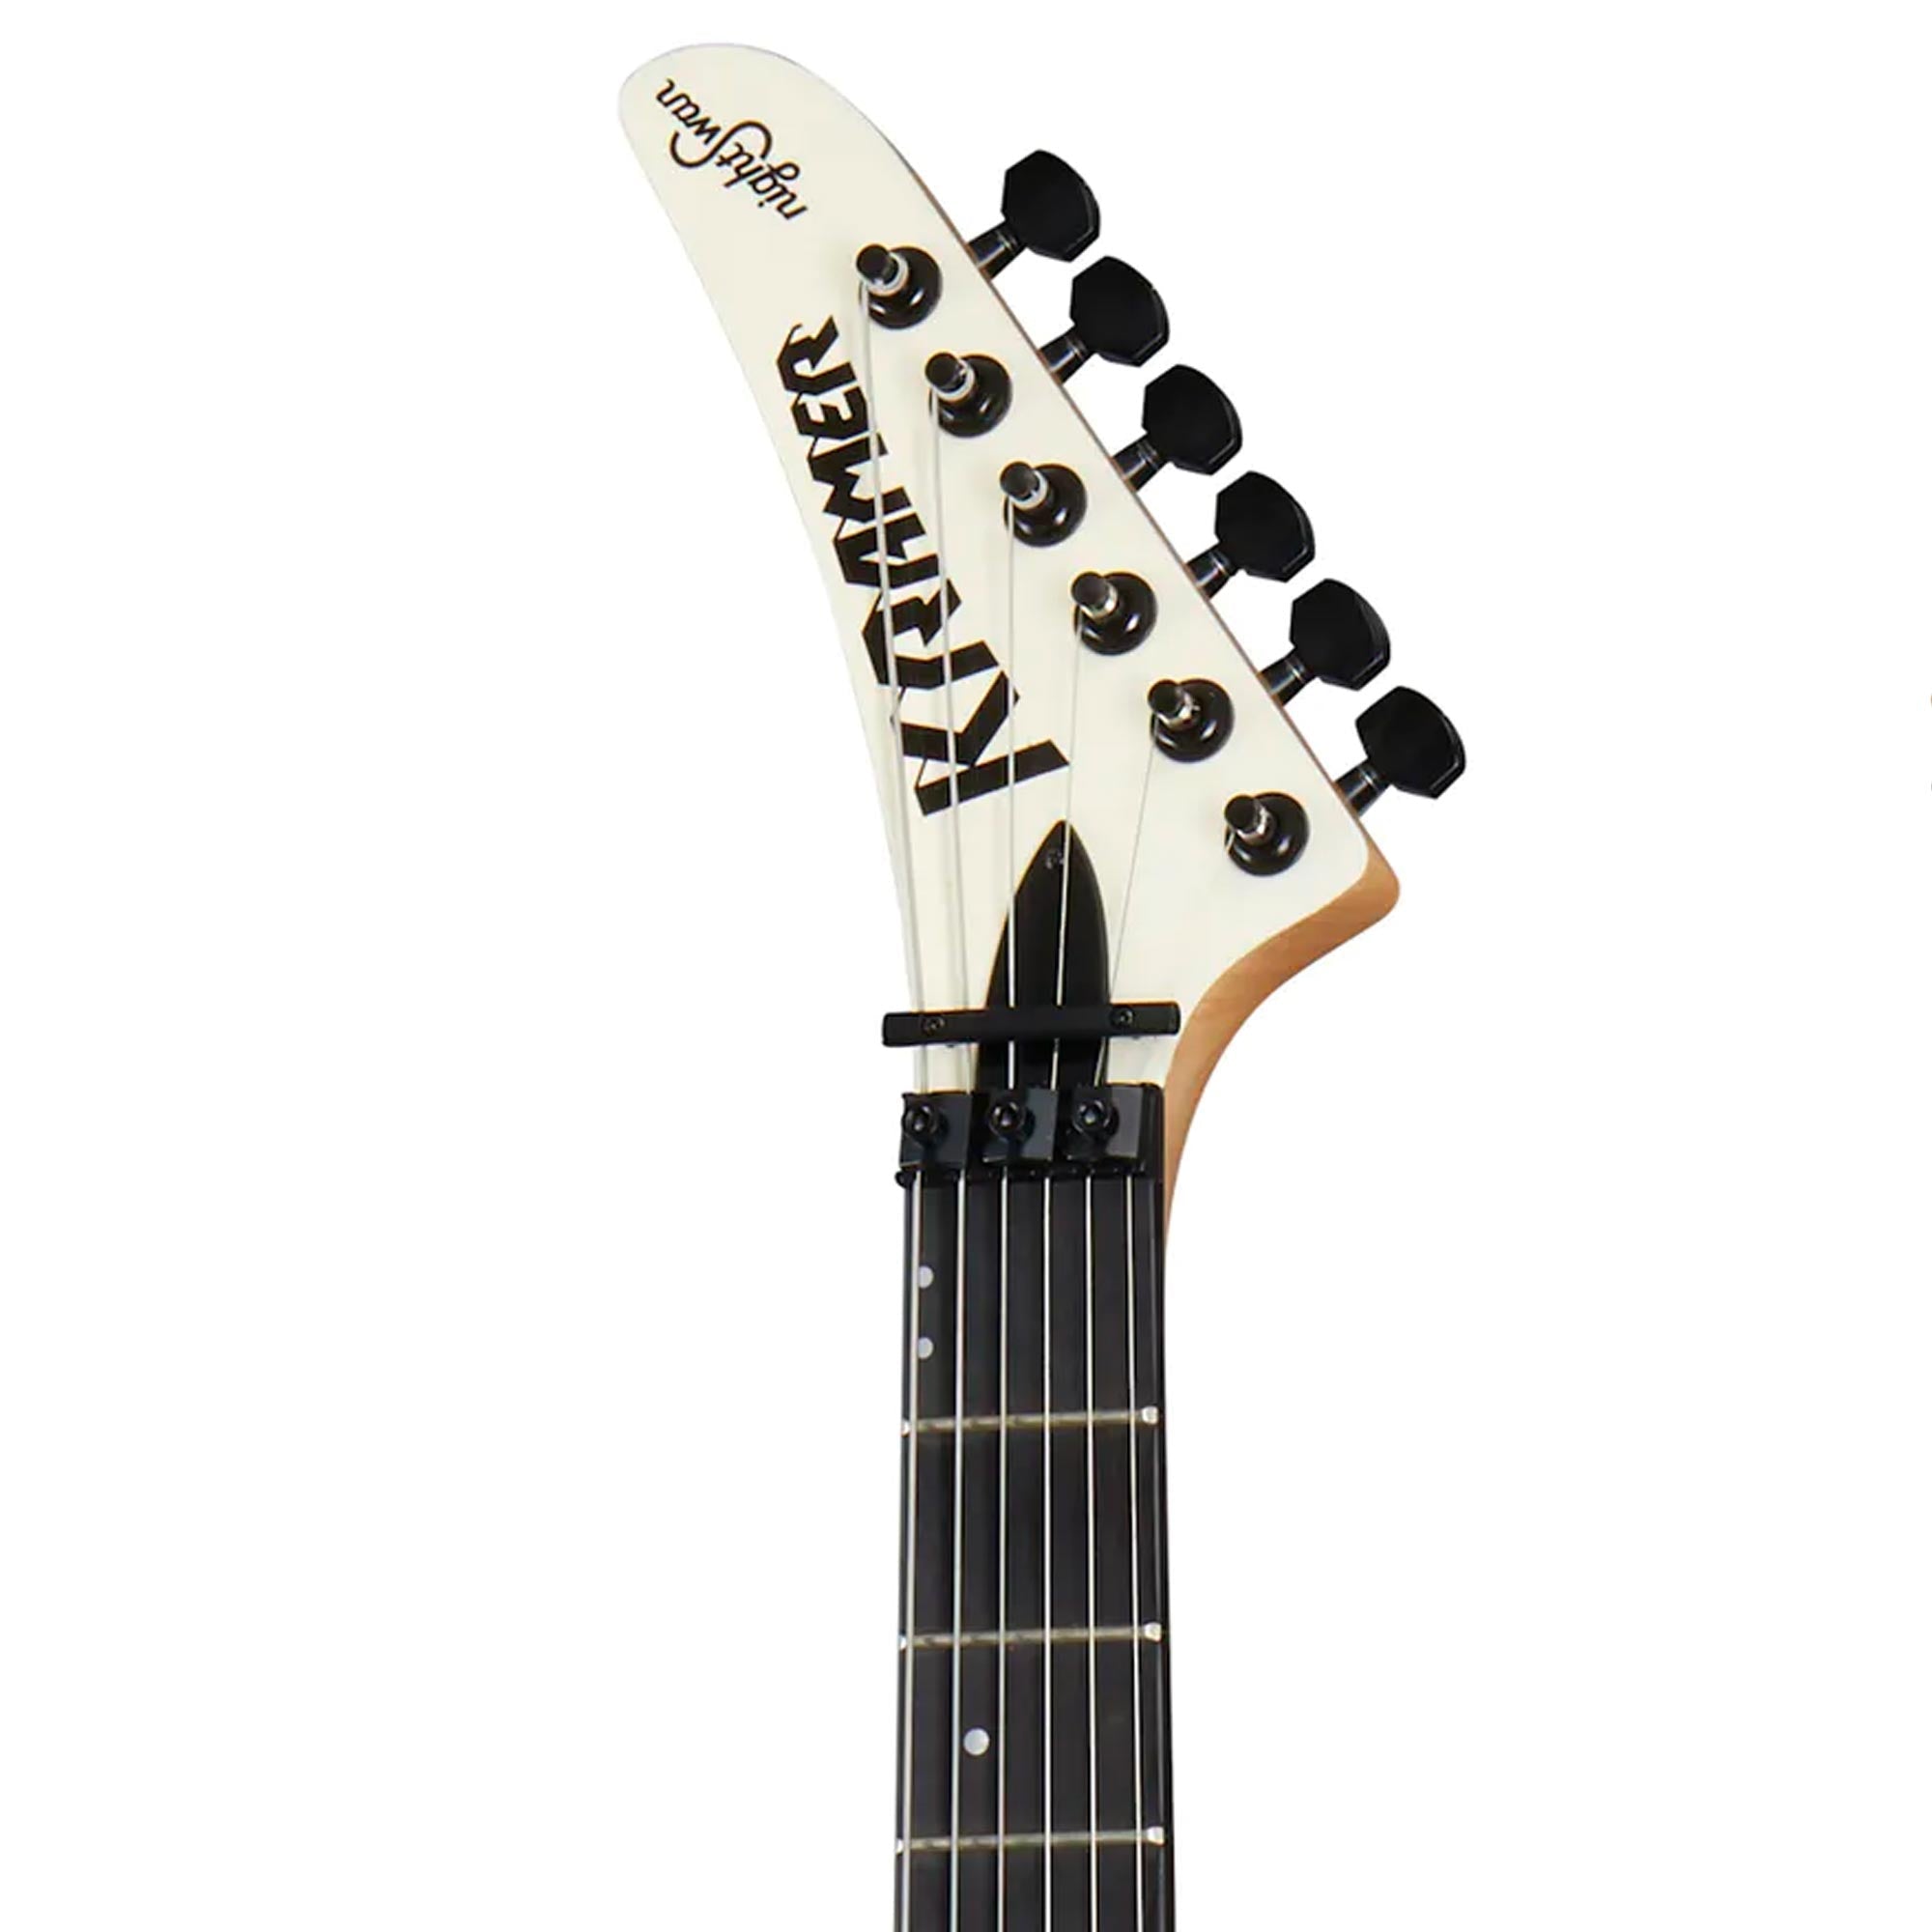 Kramer Nightswan Vintage White with Aztec Graphic | The Music Zoo